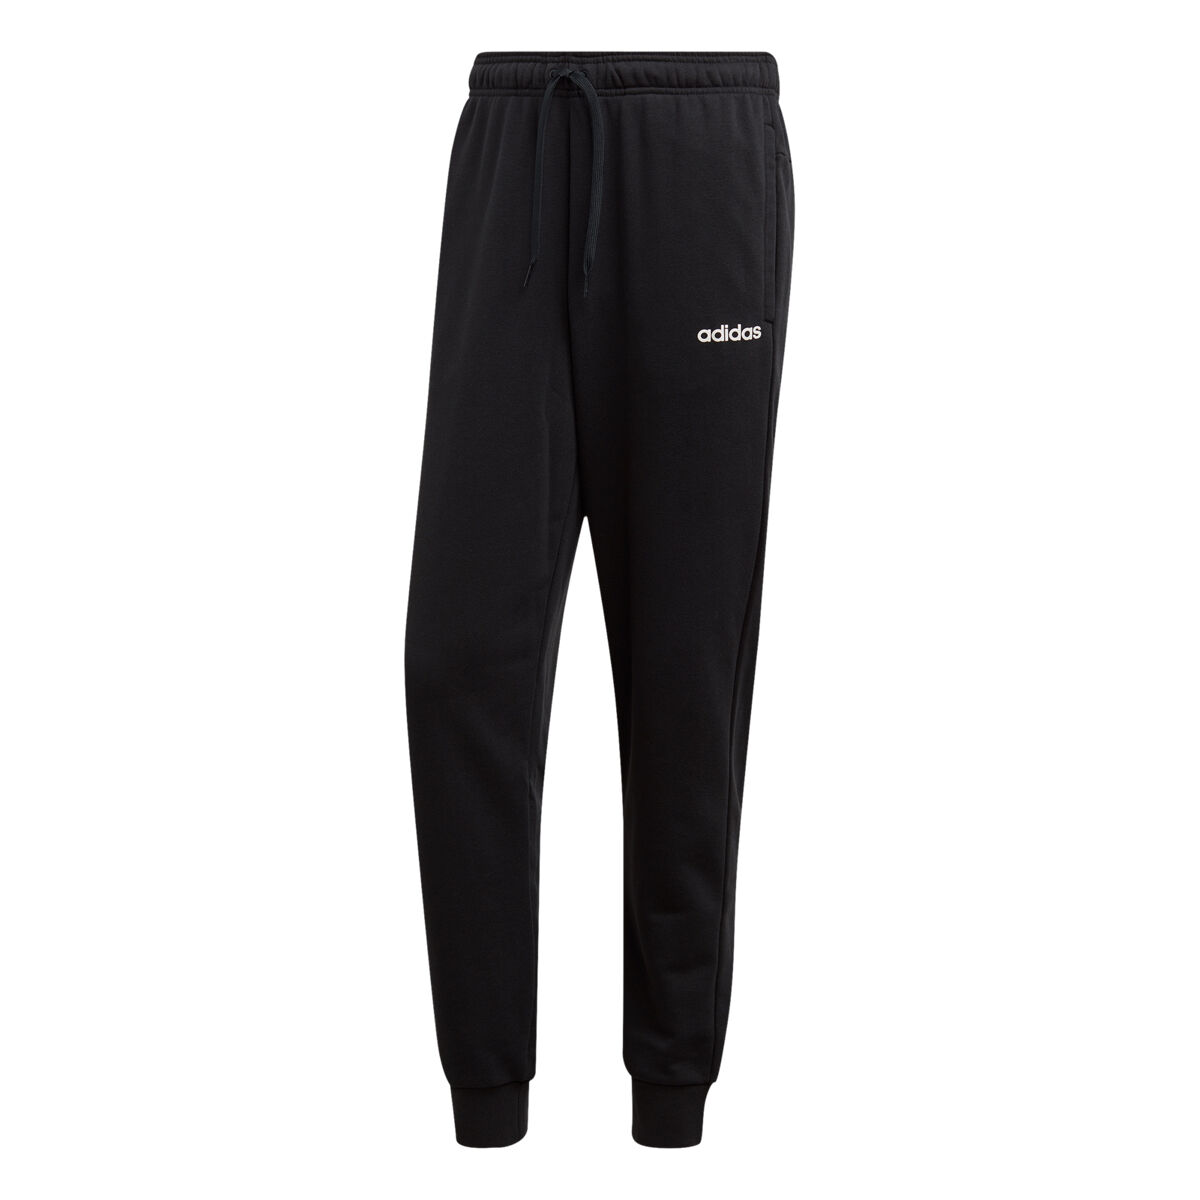 black tapered track pants